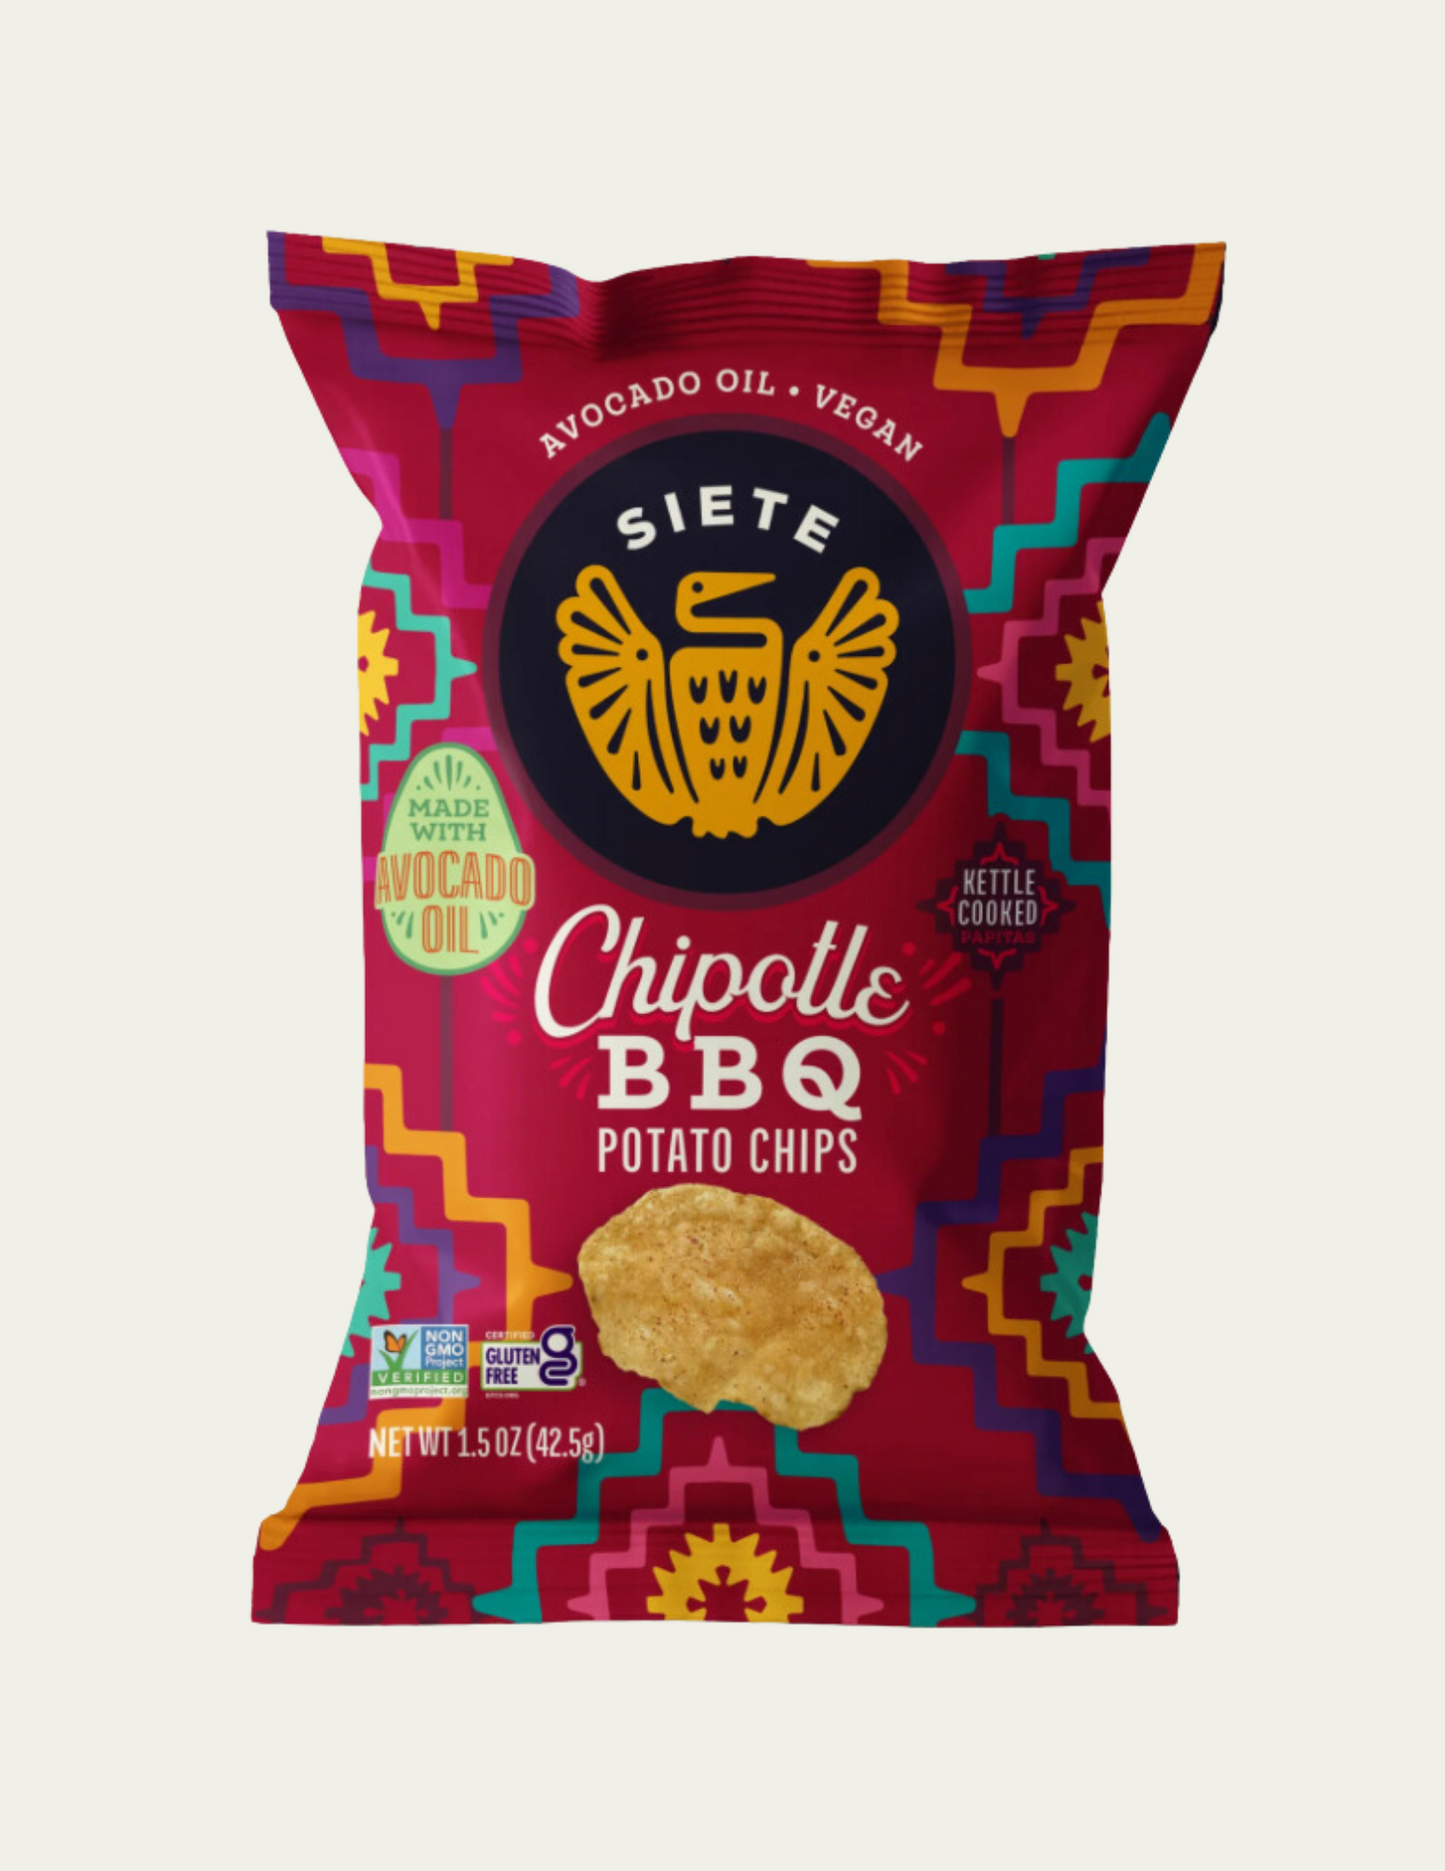 Chipotle BBQ Kettle Cooked Potato Chips 1.5oz